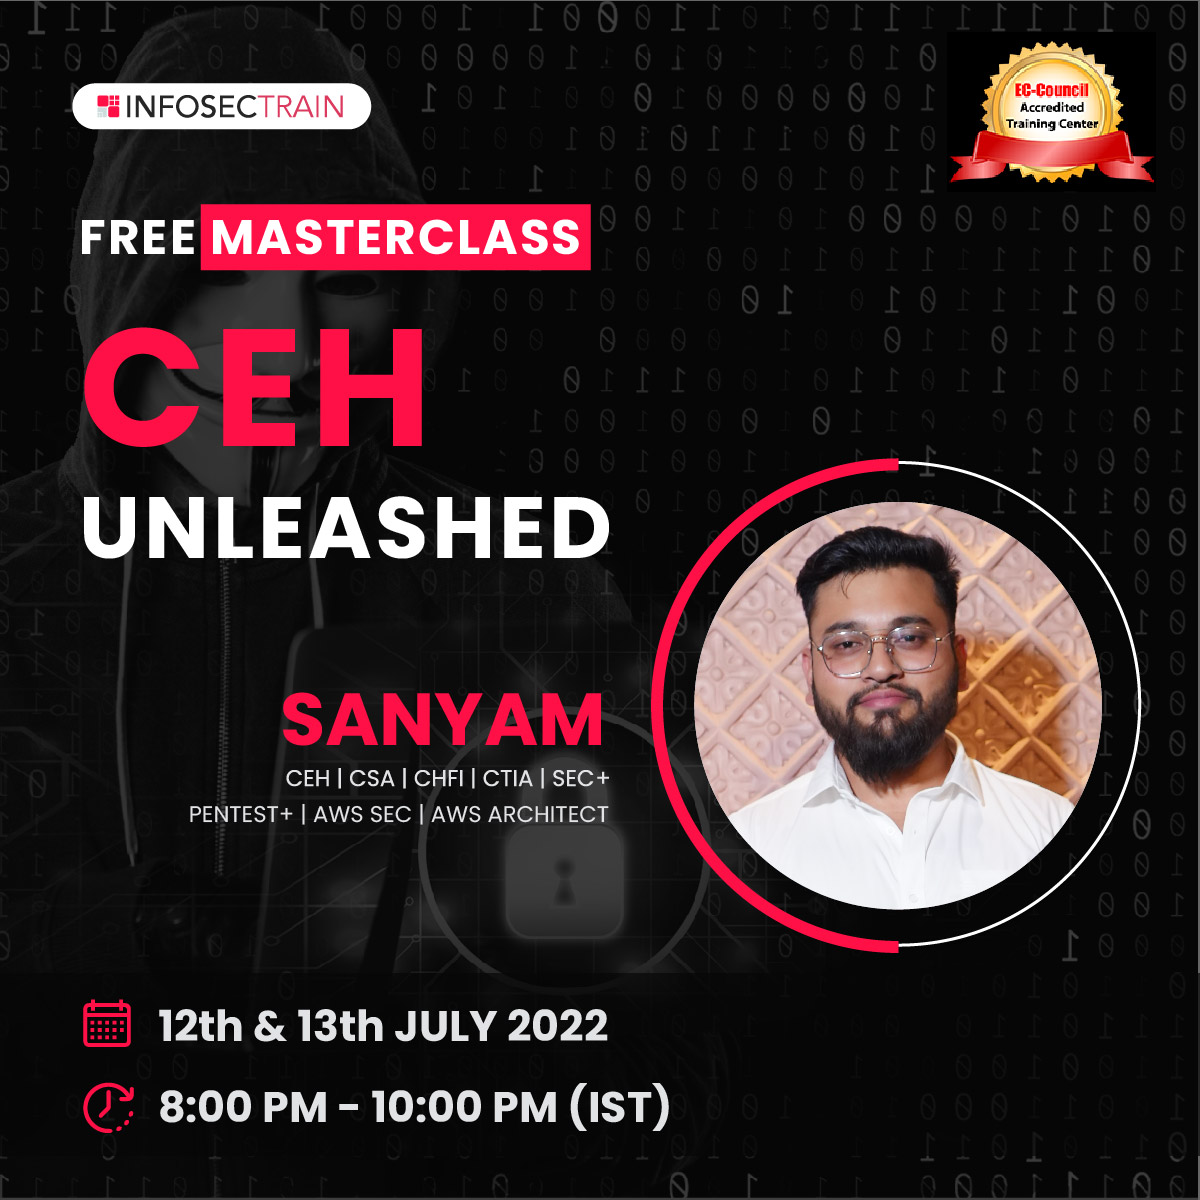 Free MasterClass On CEH Unleashed, Online Event